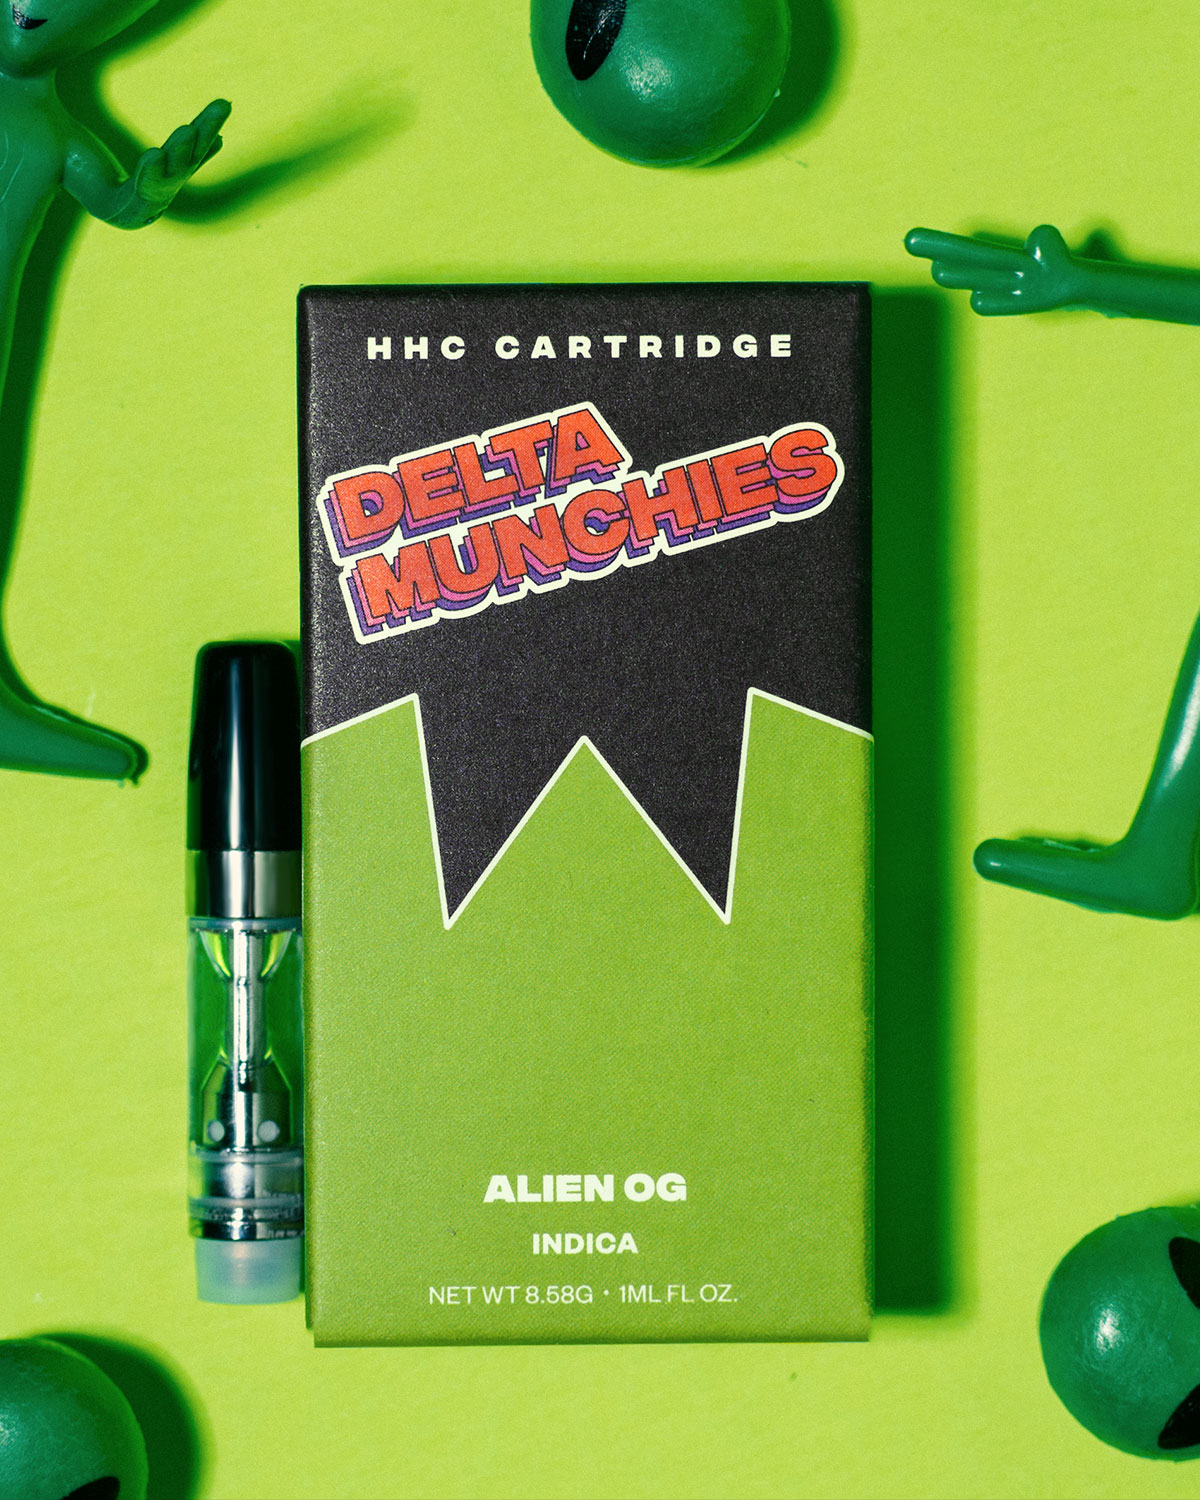 Delta Munchies HHC Alien OG Cartridge product image with green aliens